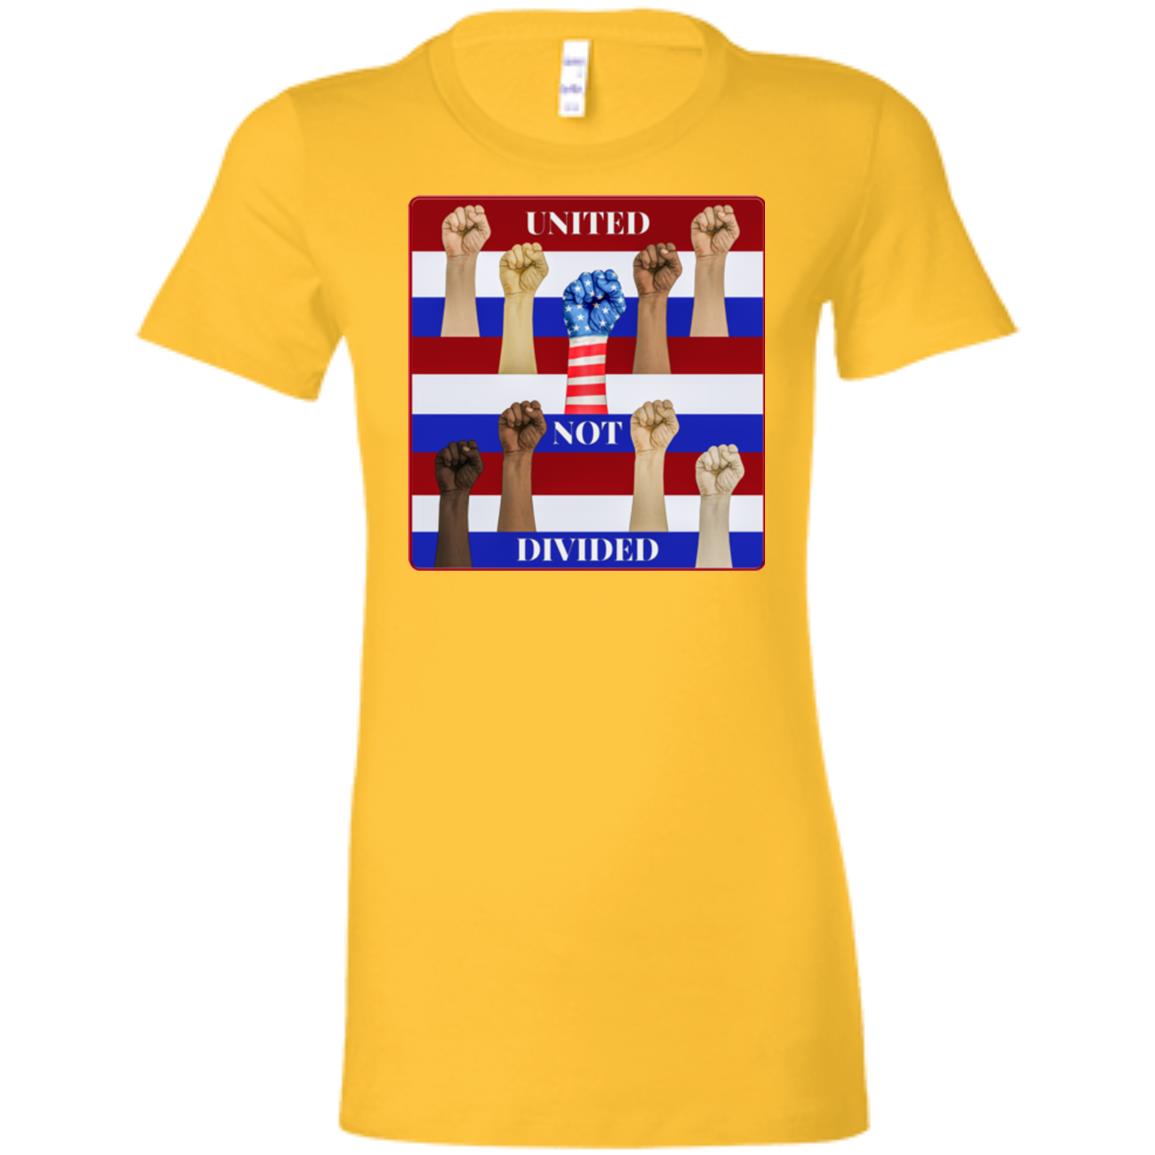 united not divided - Women's Fitted T-Shirt